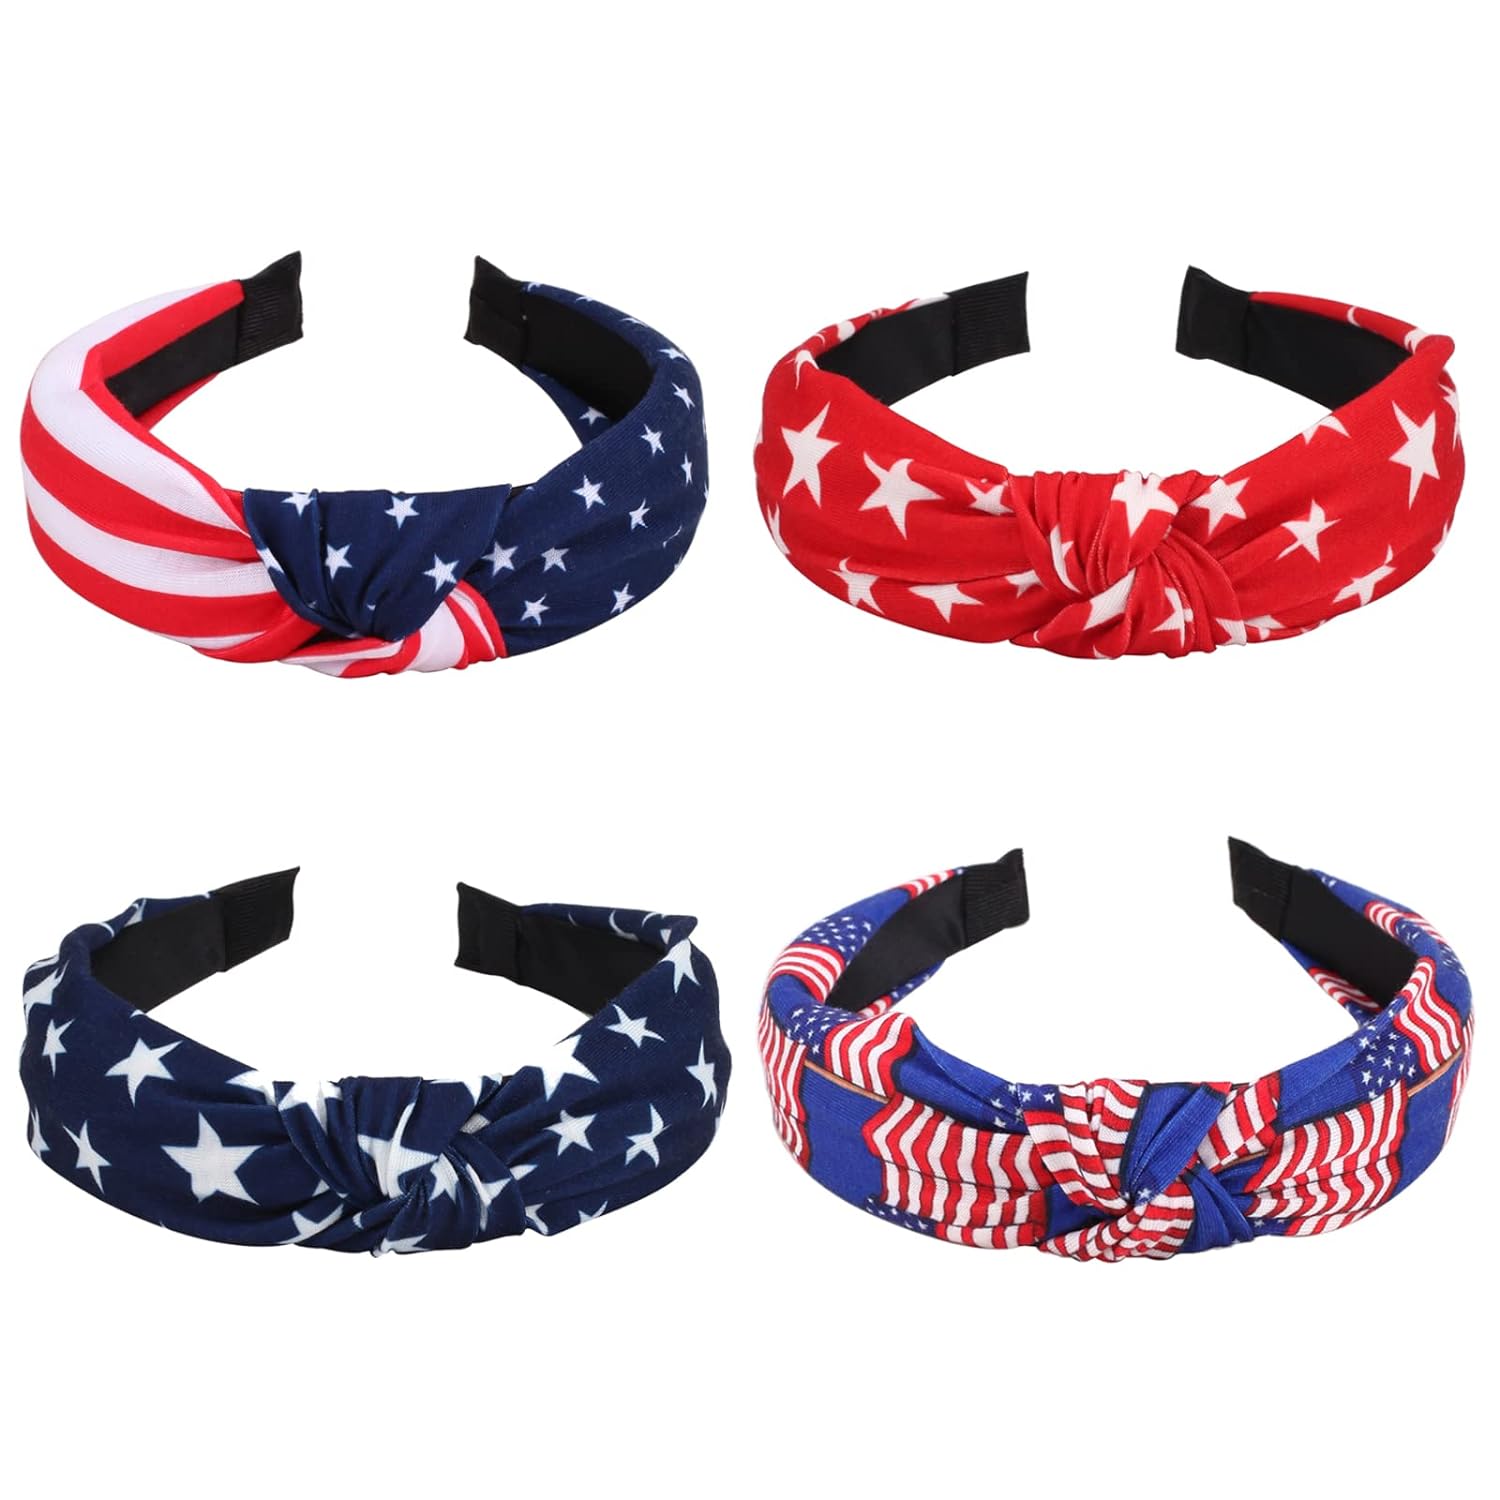 Ardorchid USA Flag Headbands American Patriotic Independence Day 4th of July Christmas Headband Hair Hoop for Women Girls from Amazon